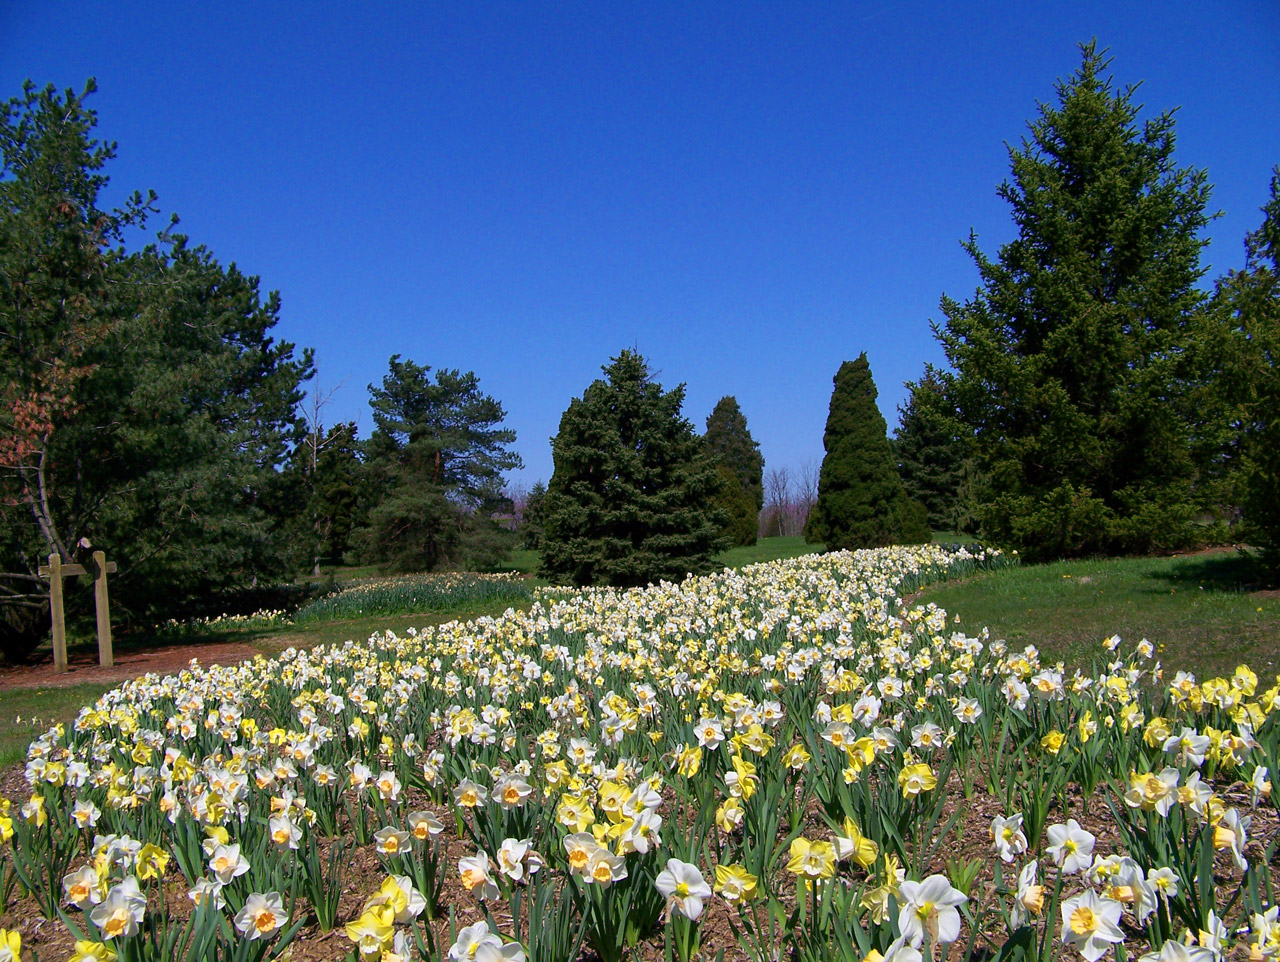 Daffodils and evergreen trees in a park